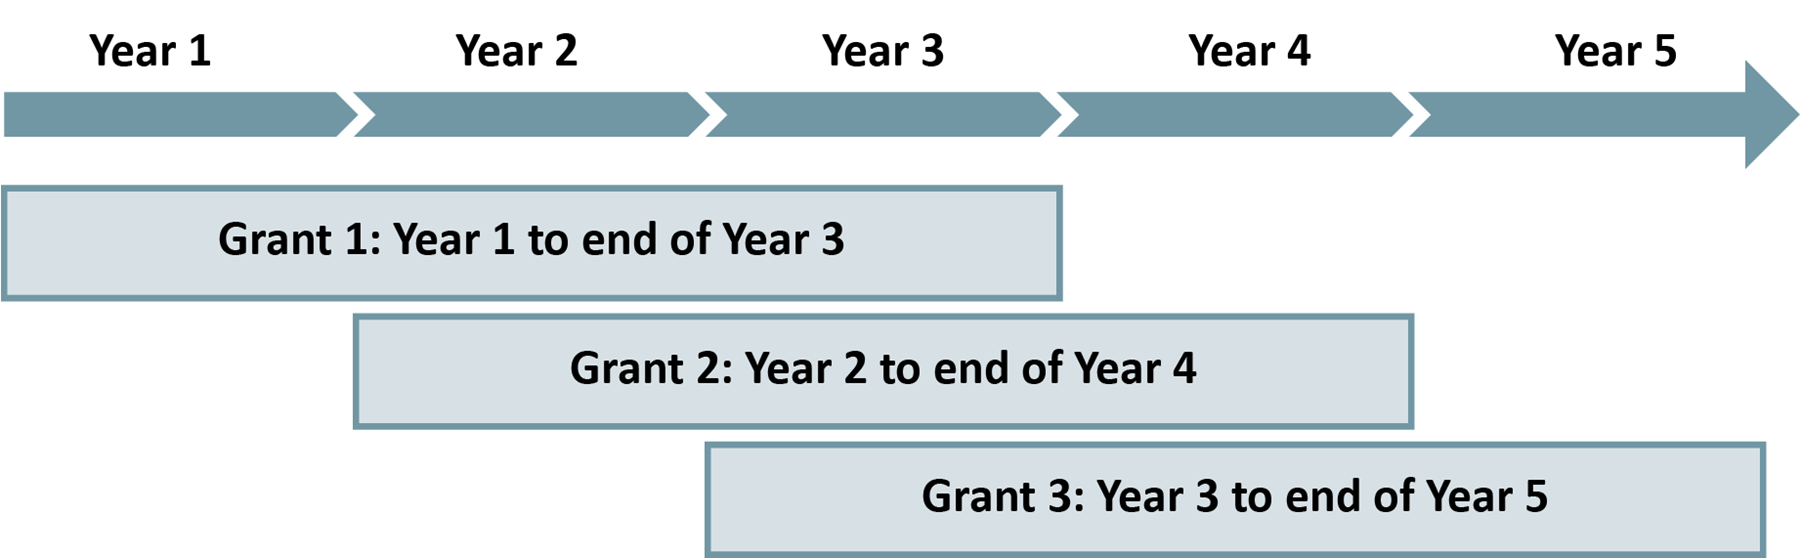 Annual and recurring RSU grants for meeting defined longer-term retention milestones.